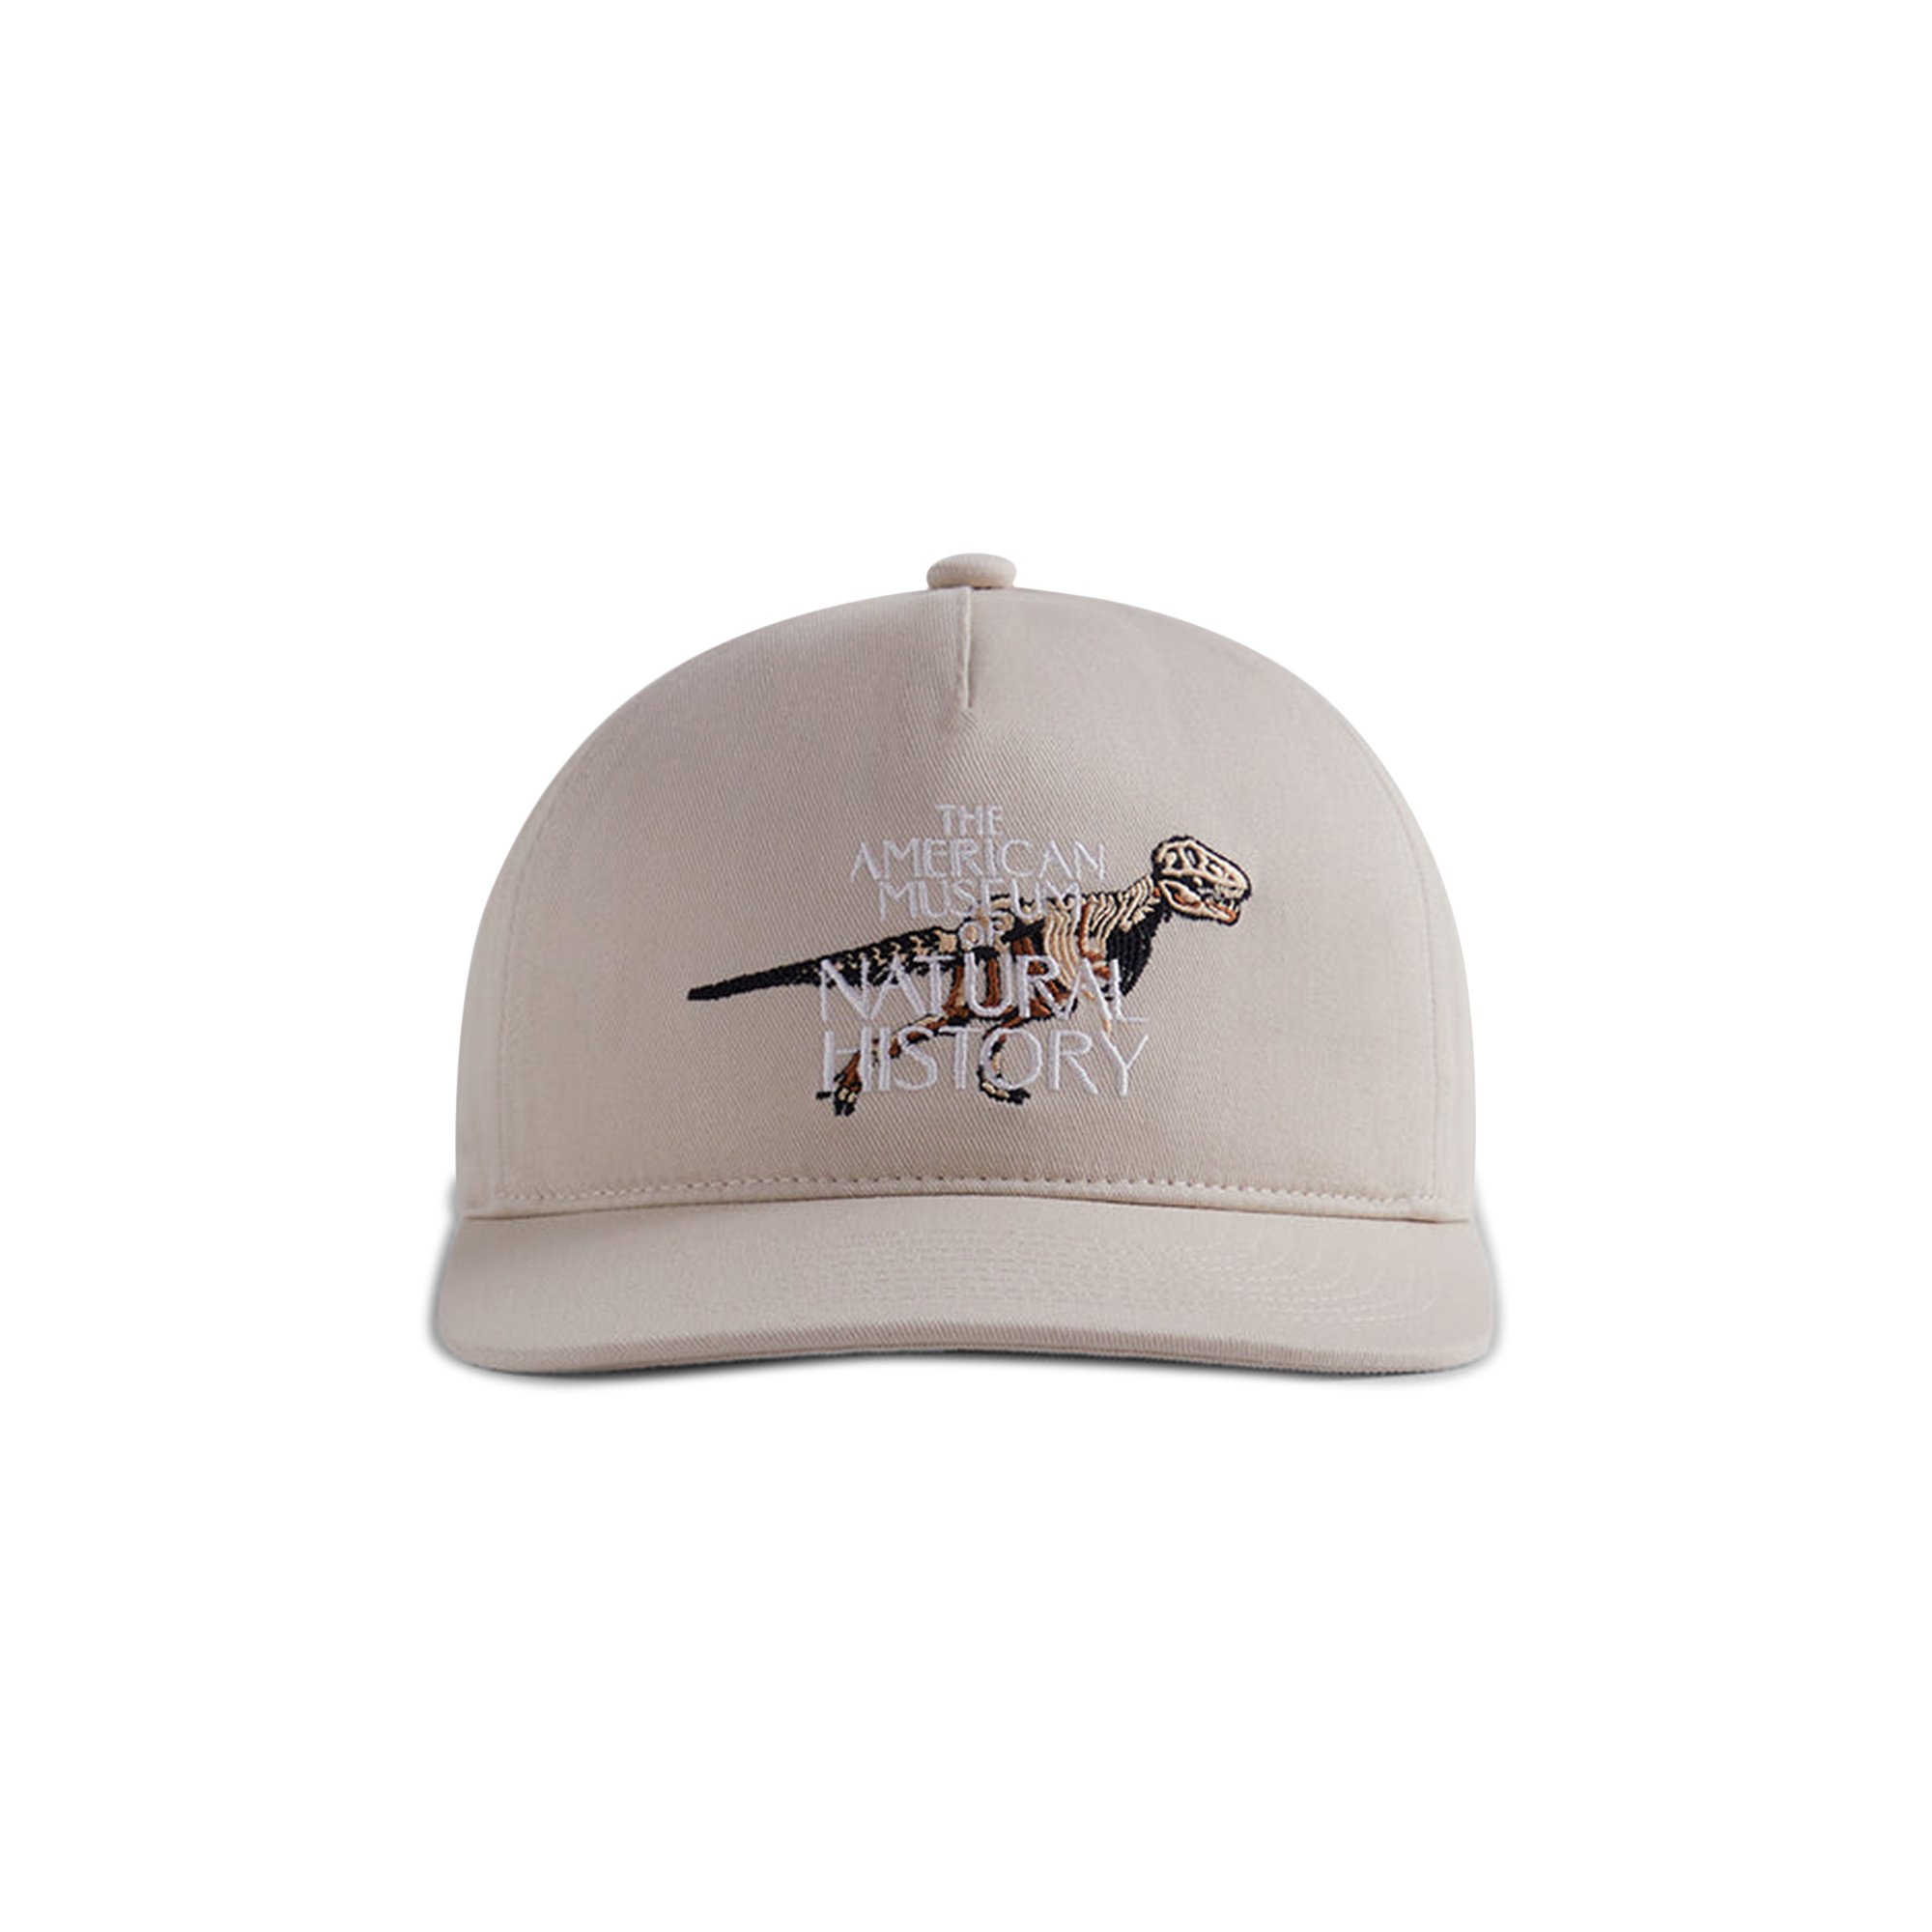 Buy Kith For AMNH Fossil Cap 'Hallow' - KHM050218 103 | GOAT